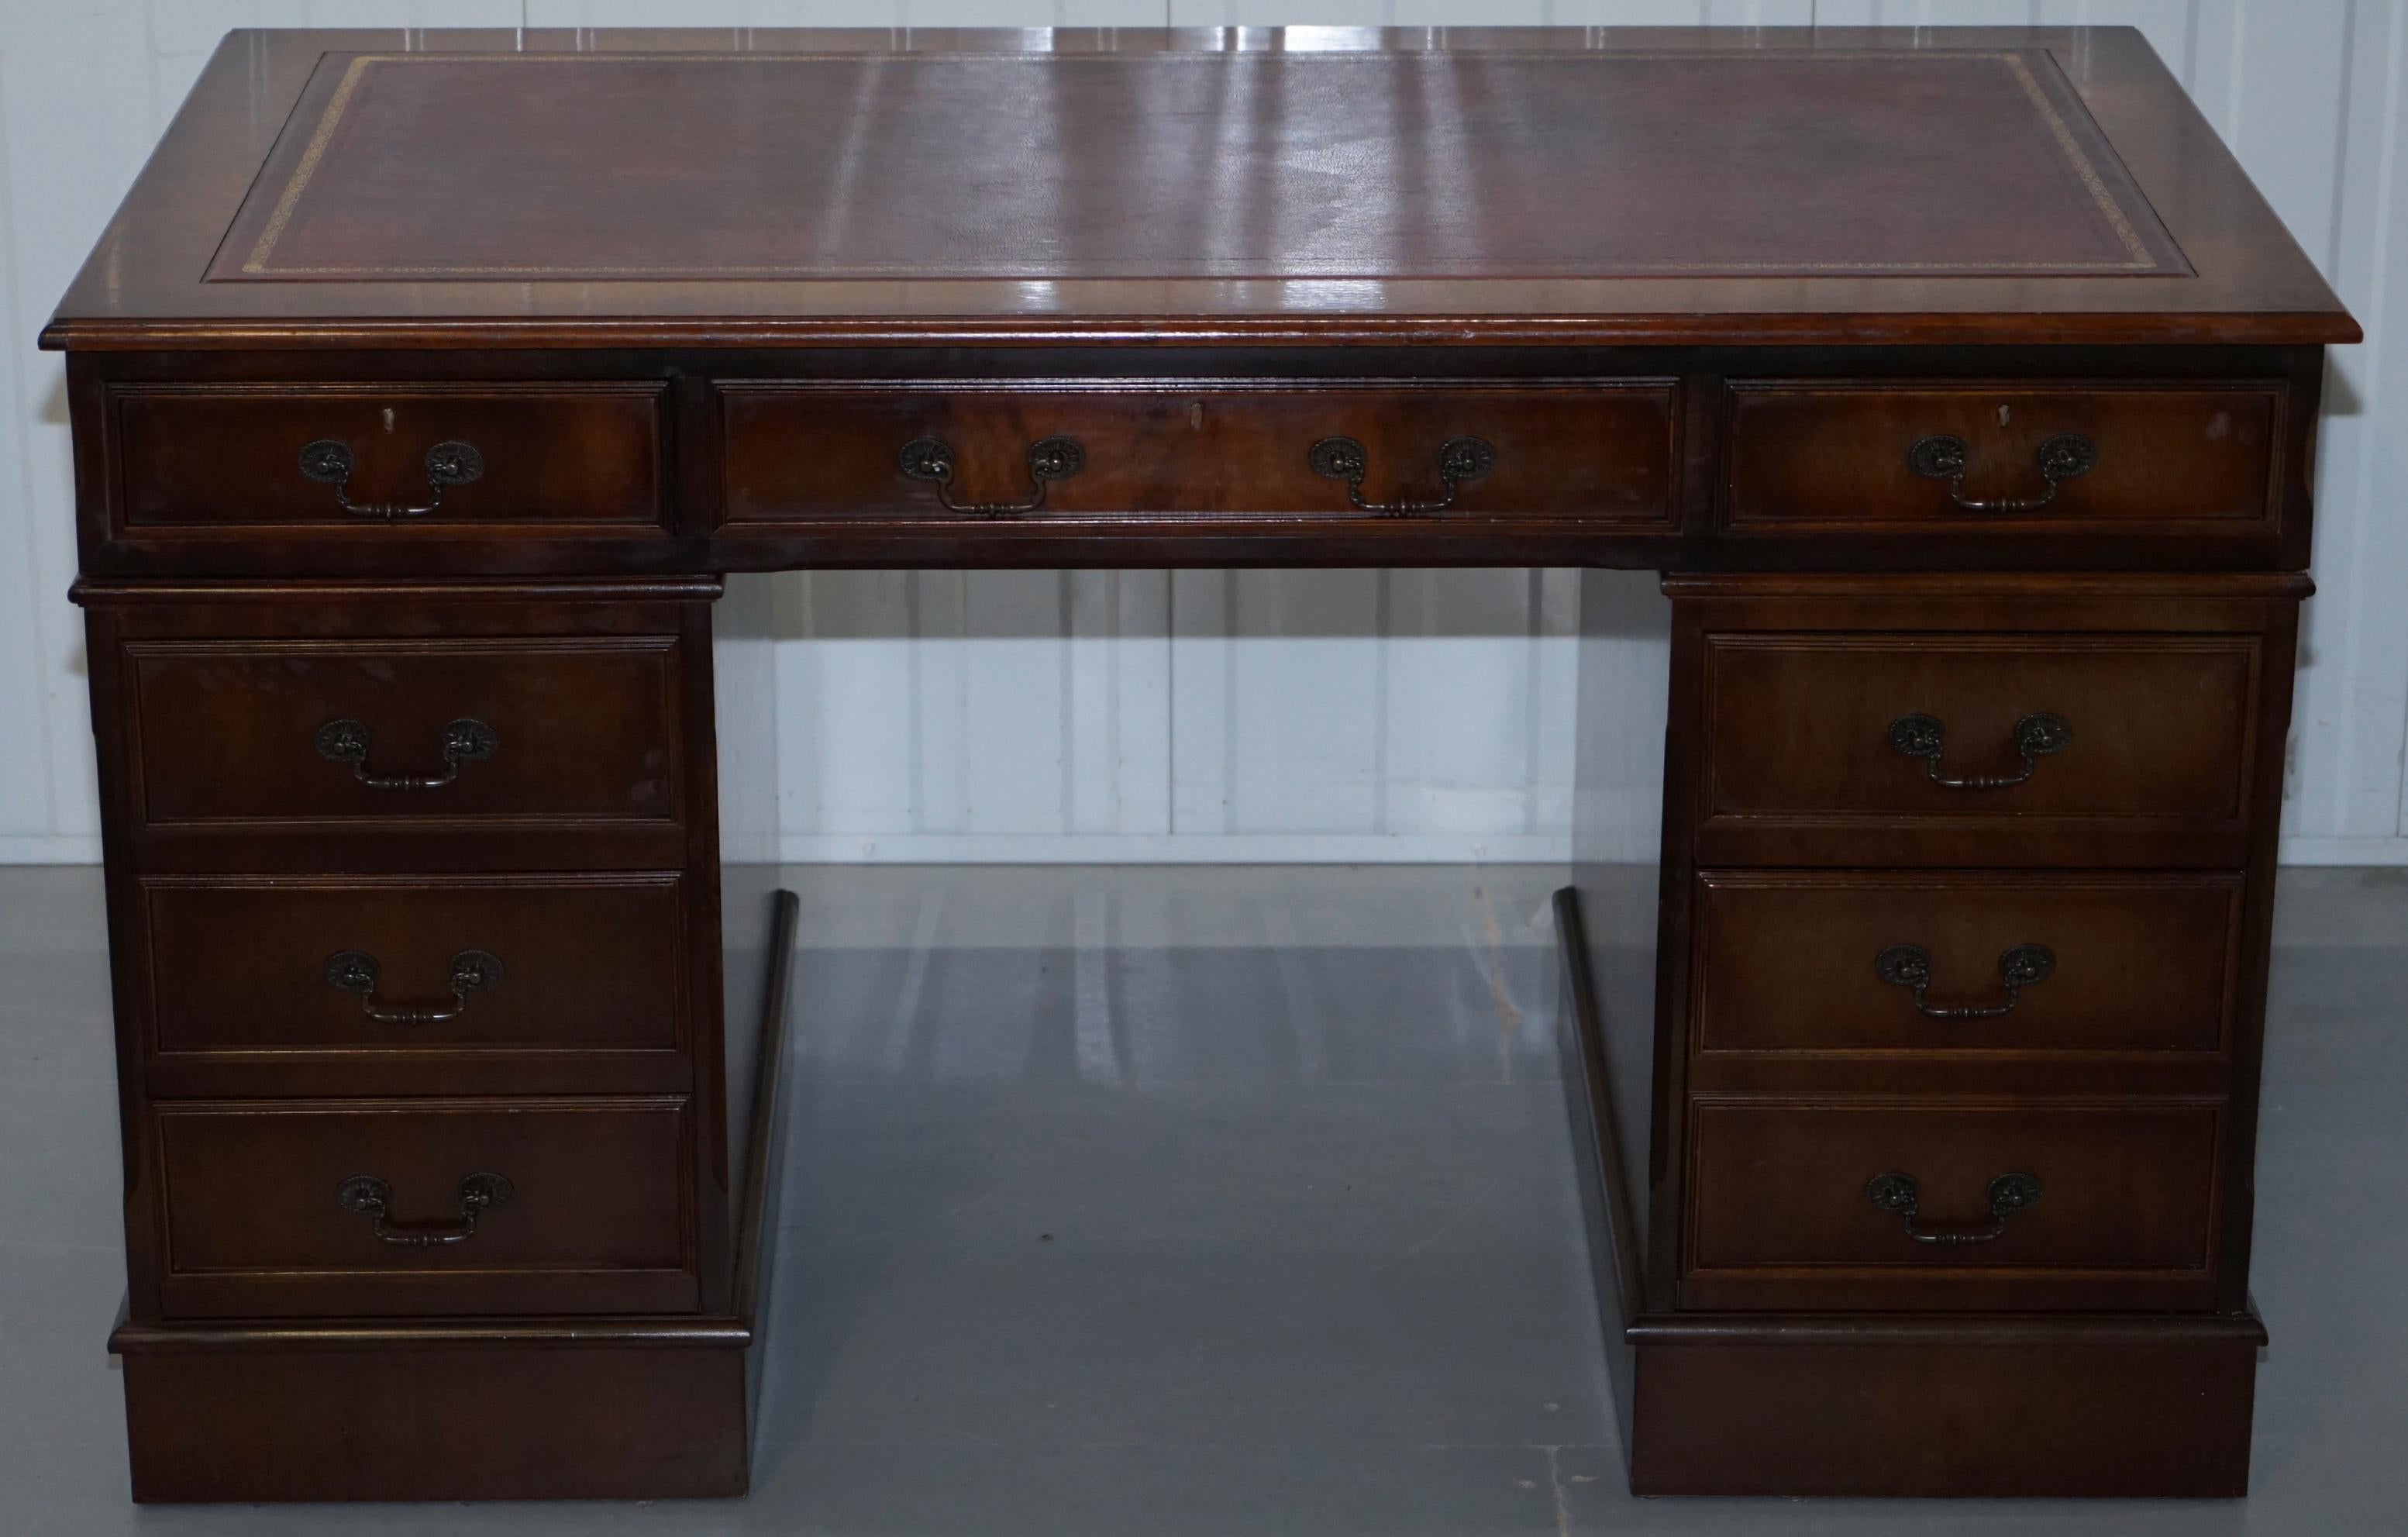 We are delighted to offer for sale this lovely solid Mahogany and pippy oak with oxblood leather writing surface twin pedestal partner desk

This desk has the tradition drawer formation which is all standard drawers and one bottom right double